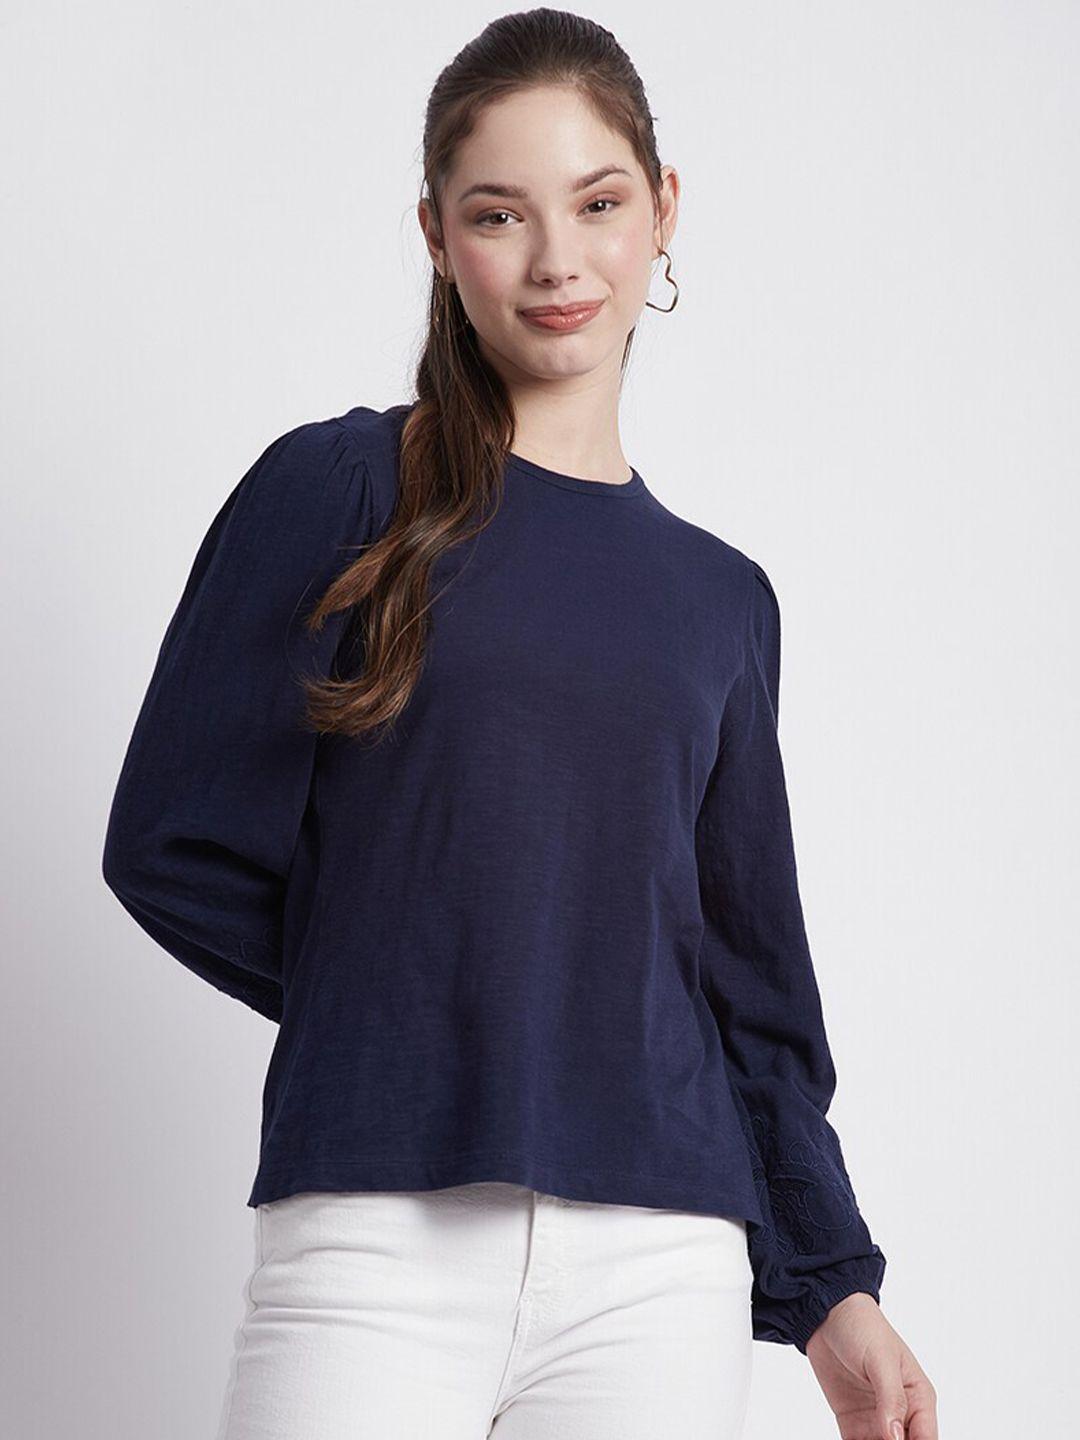 beverly hills polo club puff sleeves pure cotton top